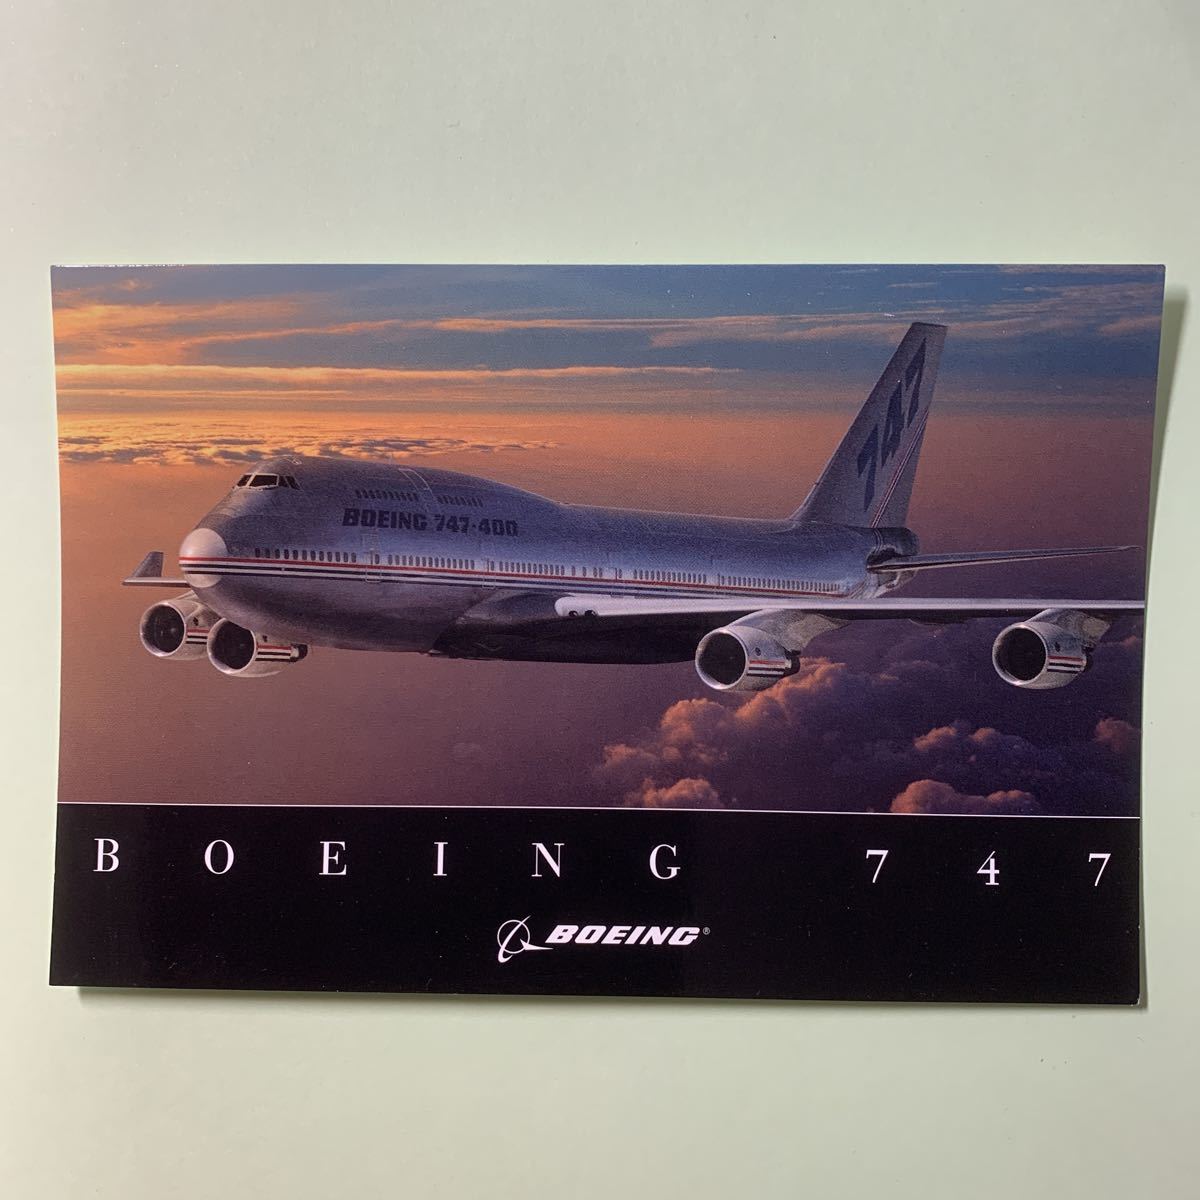  picture postcard BOEING 747bo- wing aircraft airplane passenger plane 